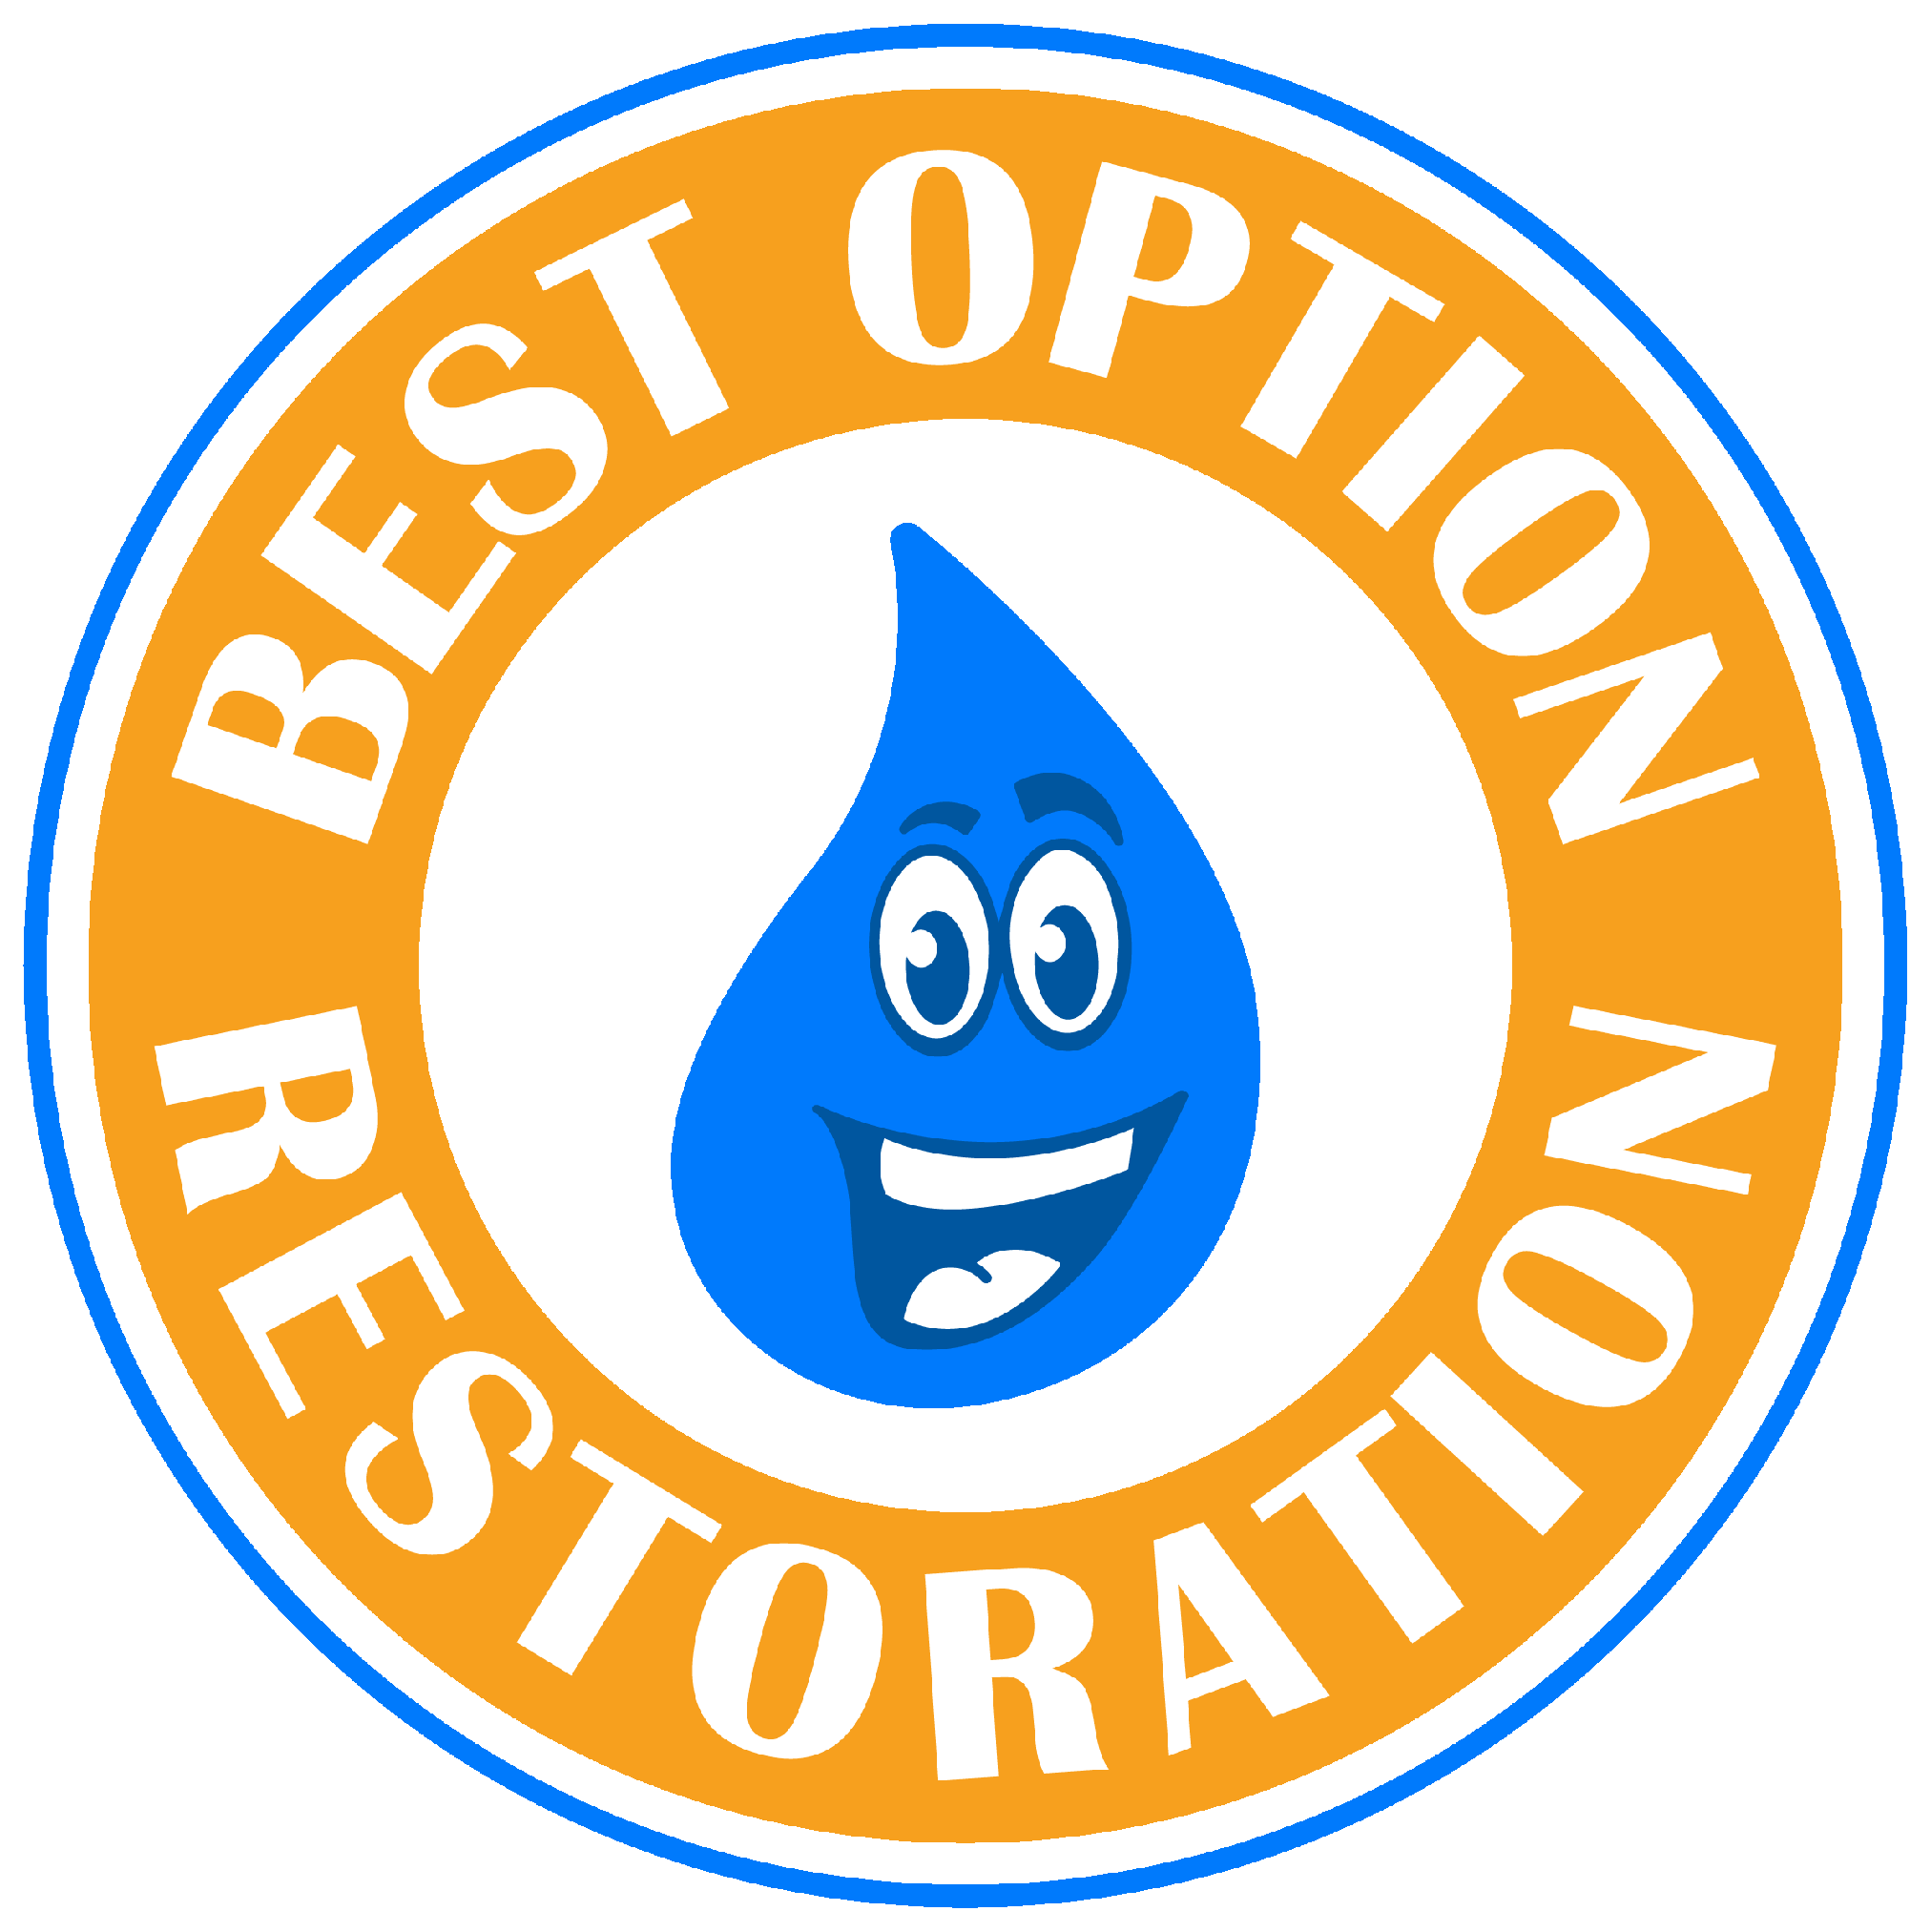 Disaster Restoration Company, Water Damage Repair Service in New Braunfels, TX